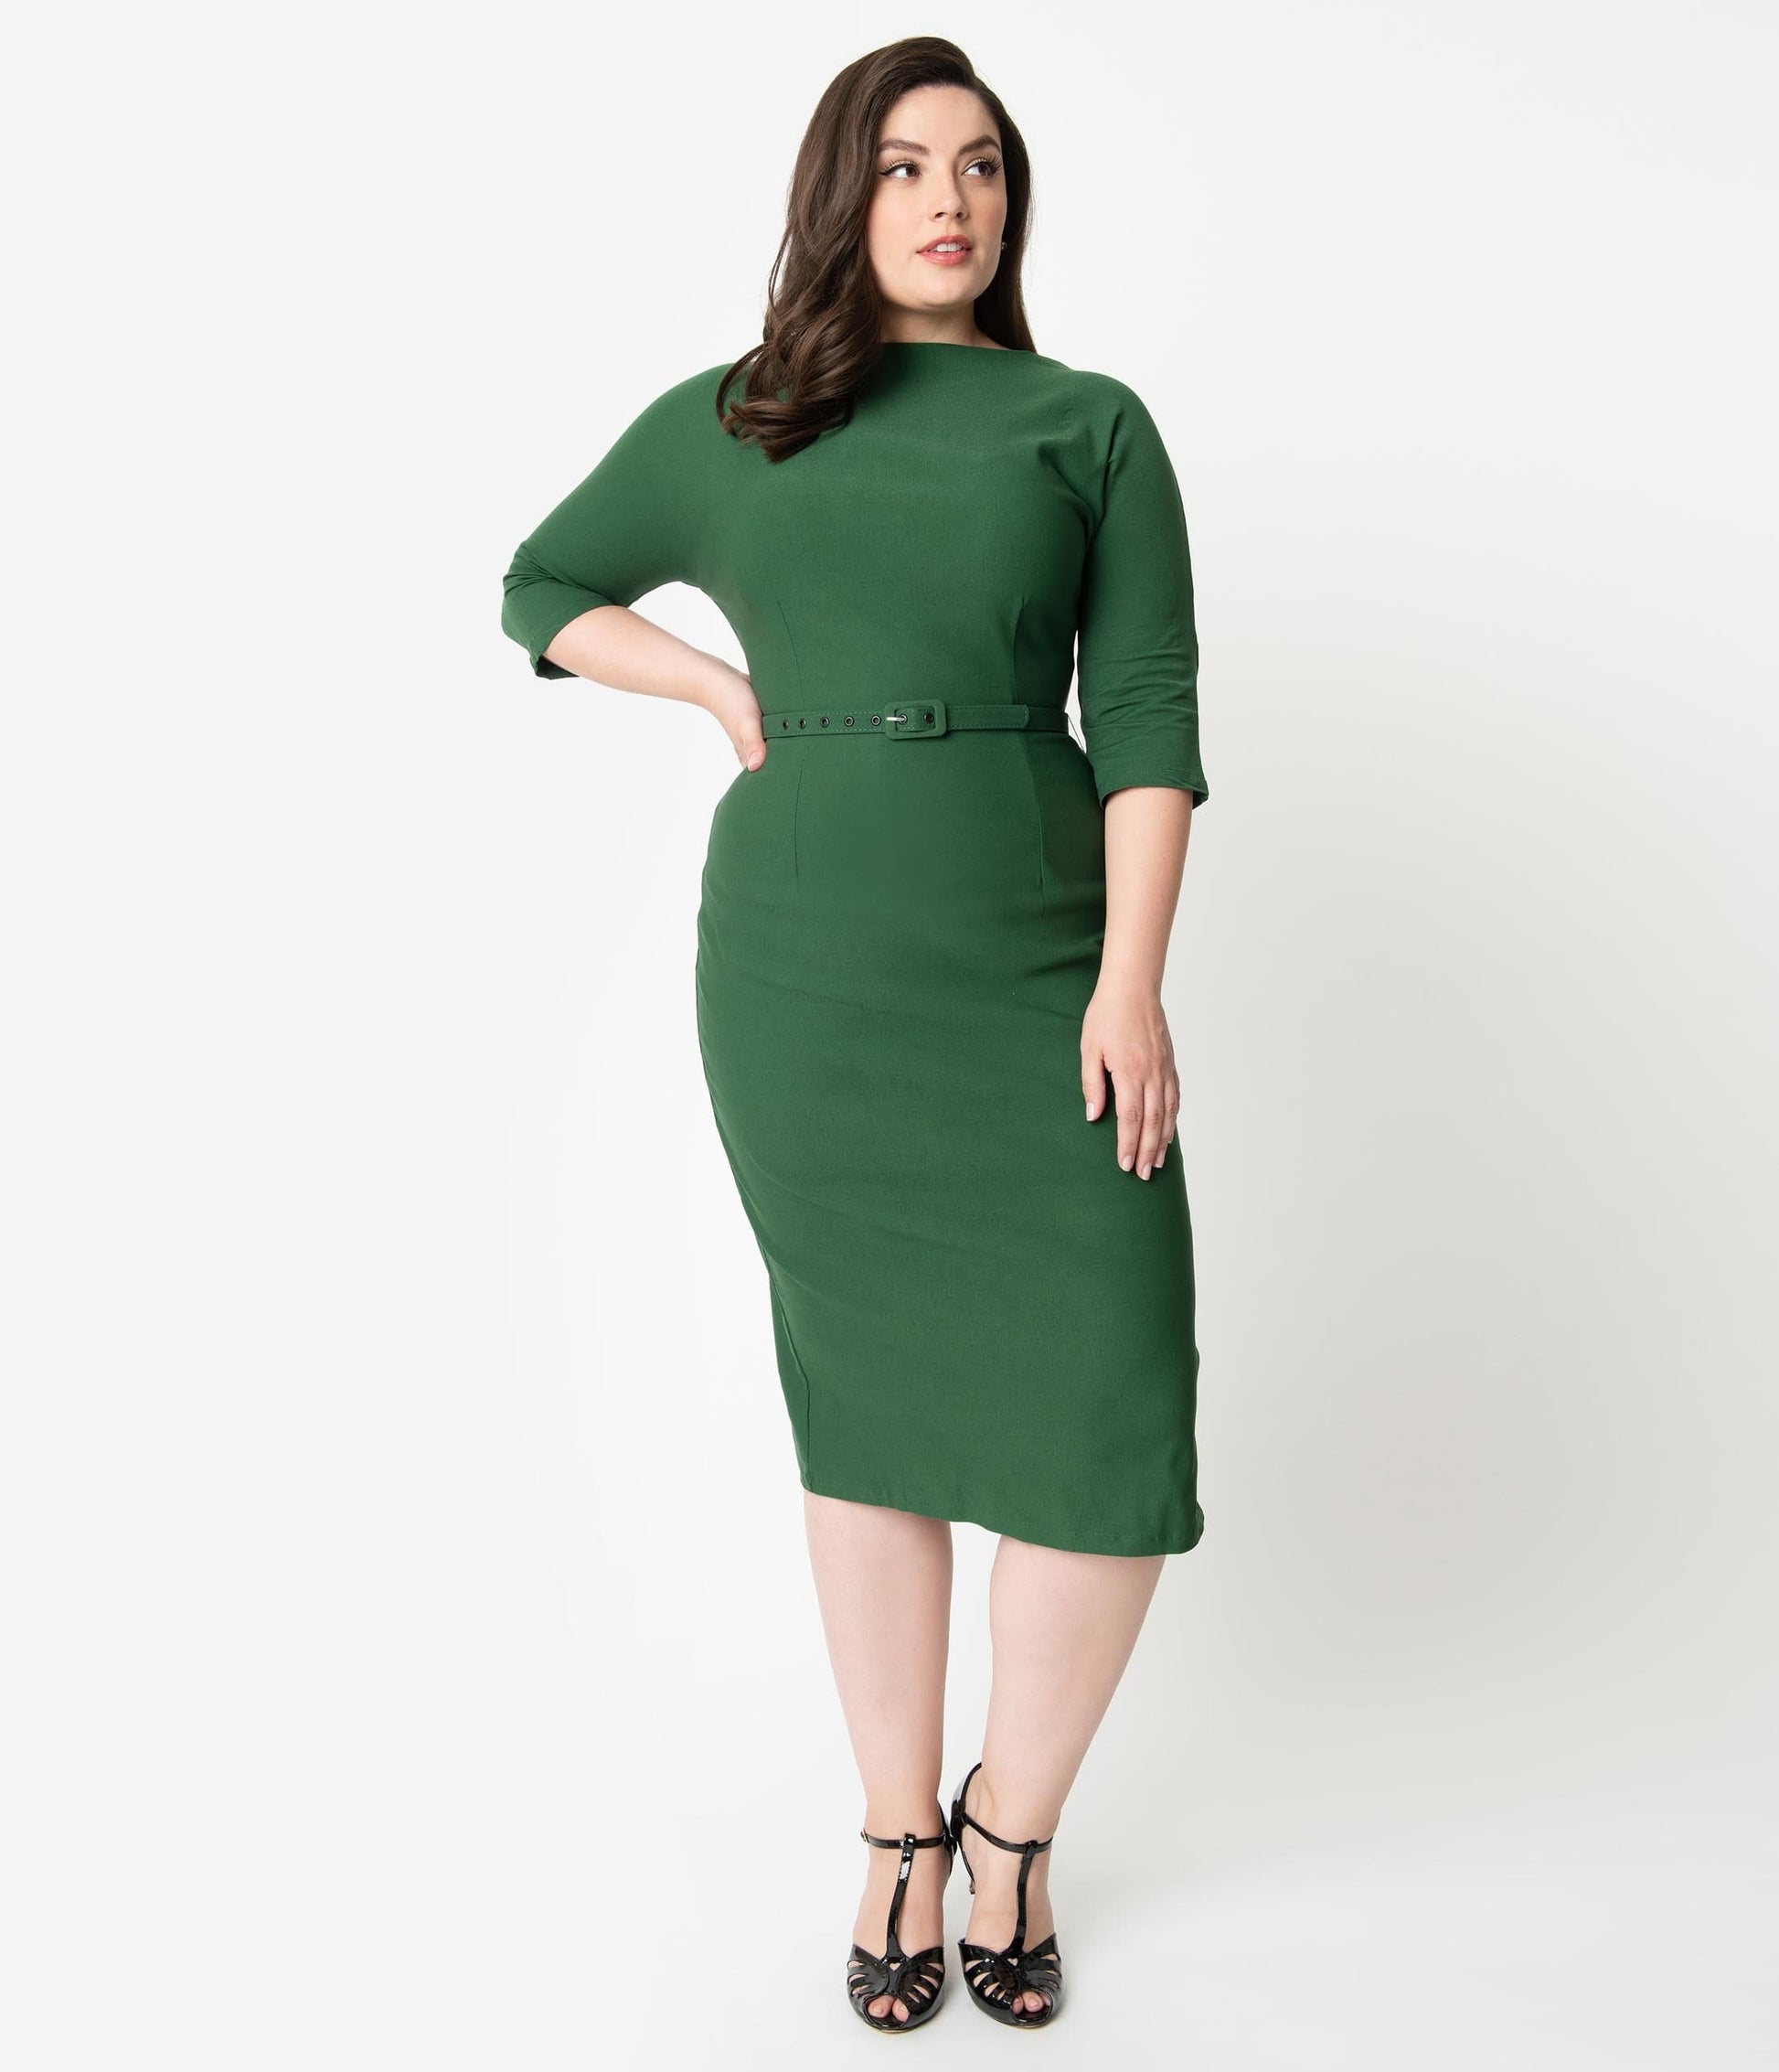 Unique Vintage Plus Size 1940s Style Green Stretch Sleeved Adelia Wiggle Dress